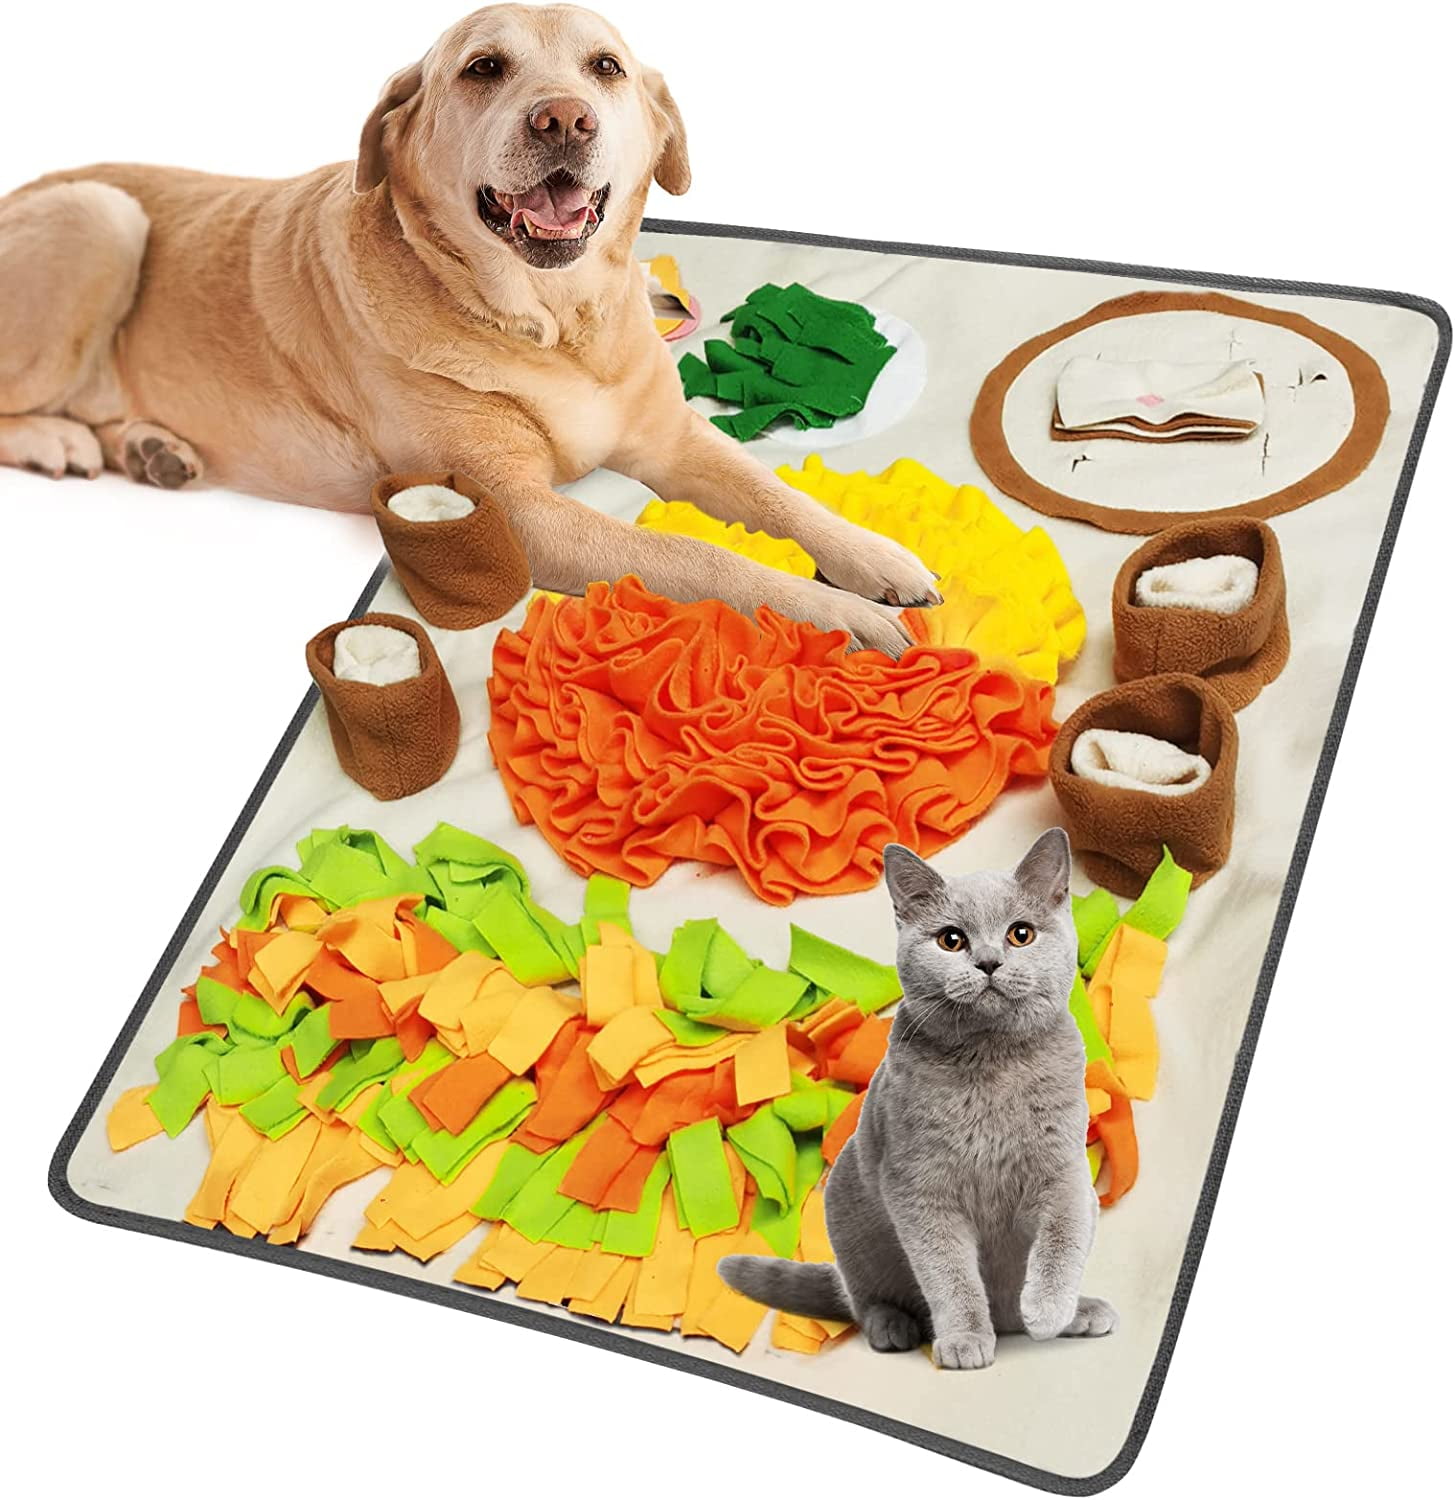 Trouble with Food Puzzles for Pets? Try These 6 Tips - Vetstreet